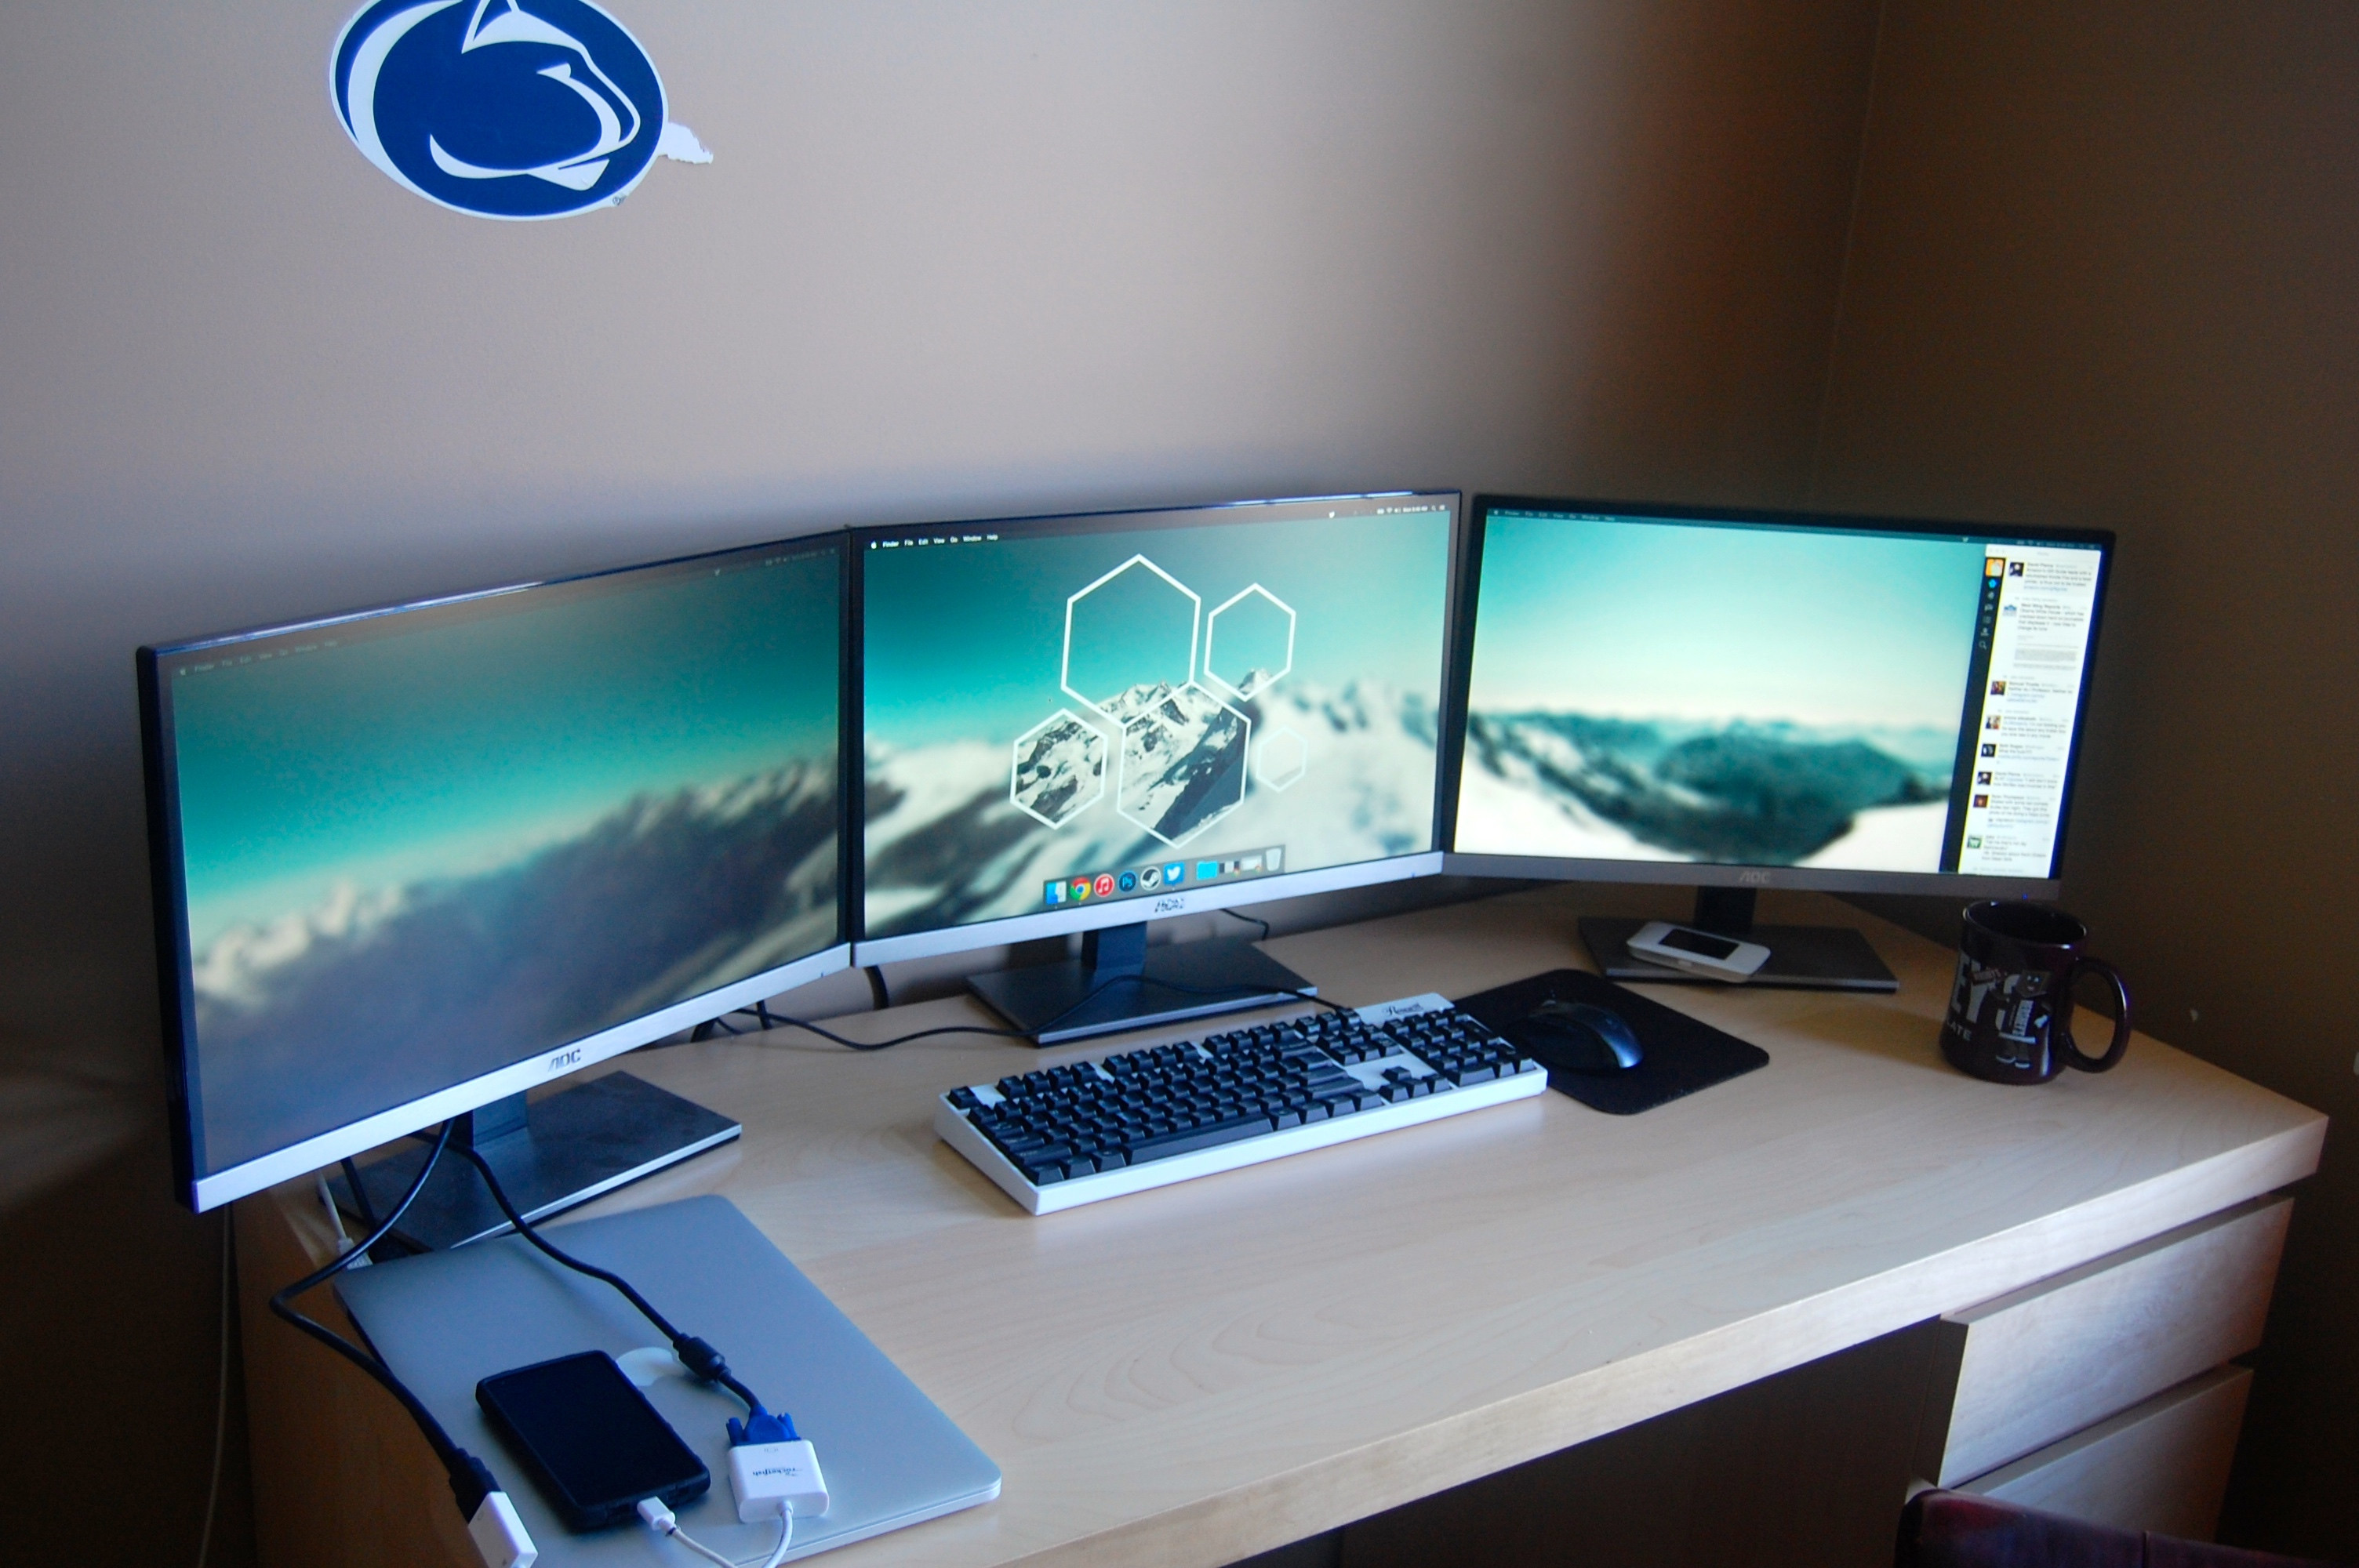 can i hook up 2 monitors to my imac